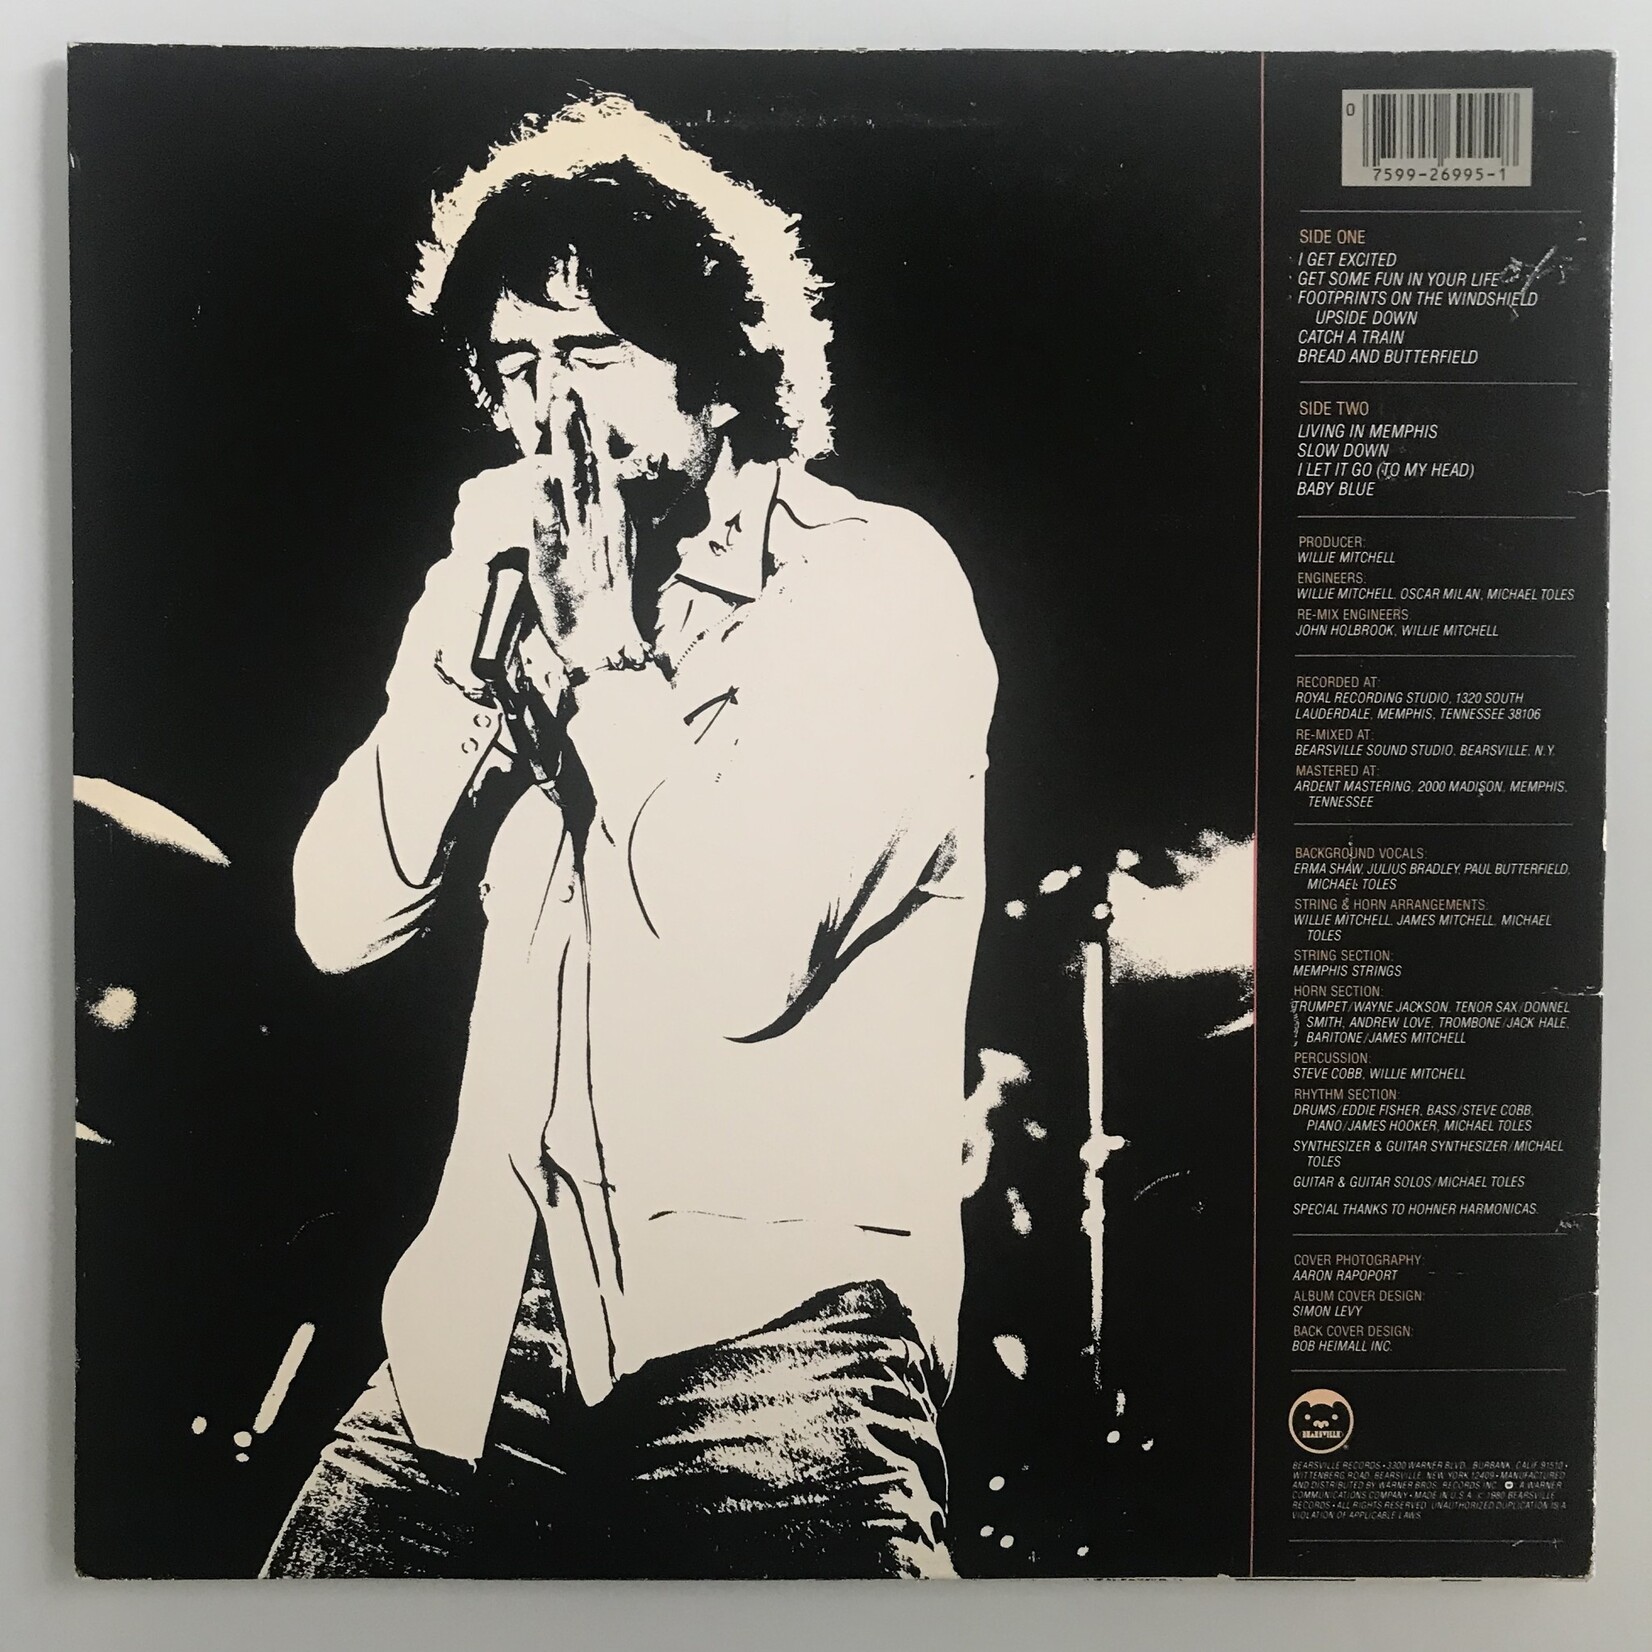 Paul Butterfield - North South - Vinyl LP (USED)